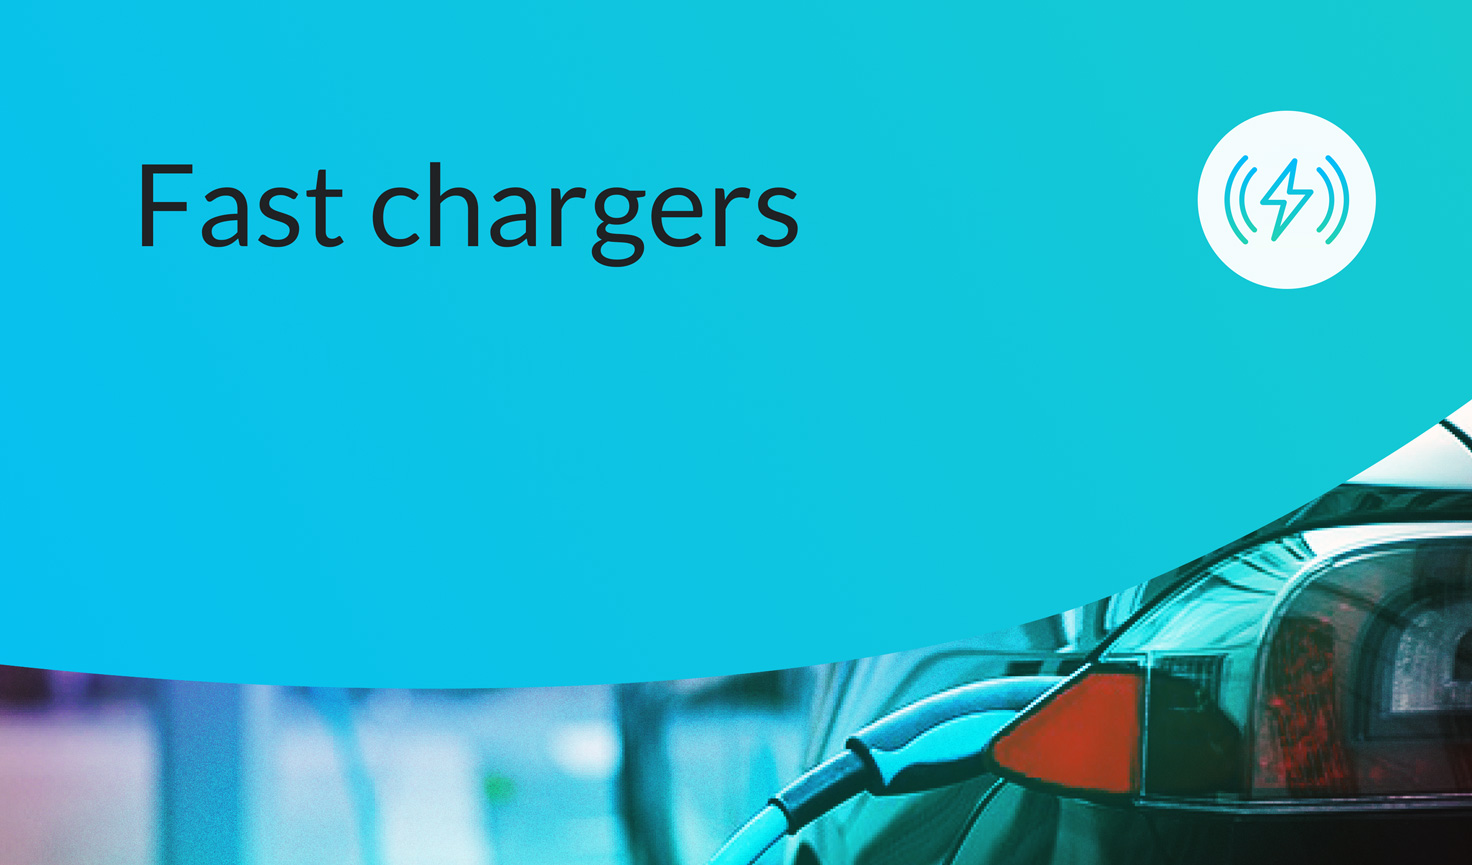 Fast chargers